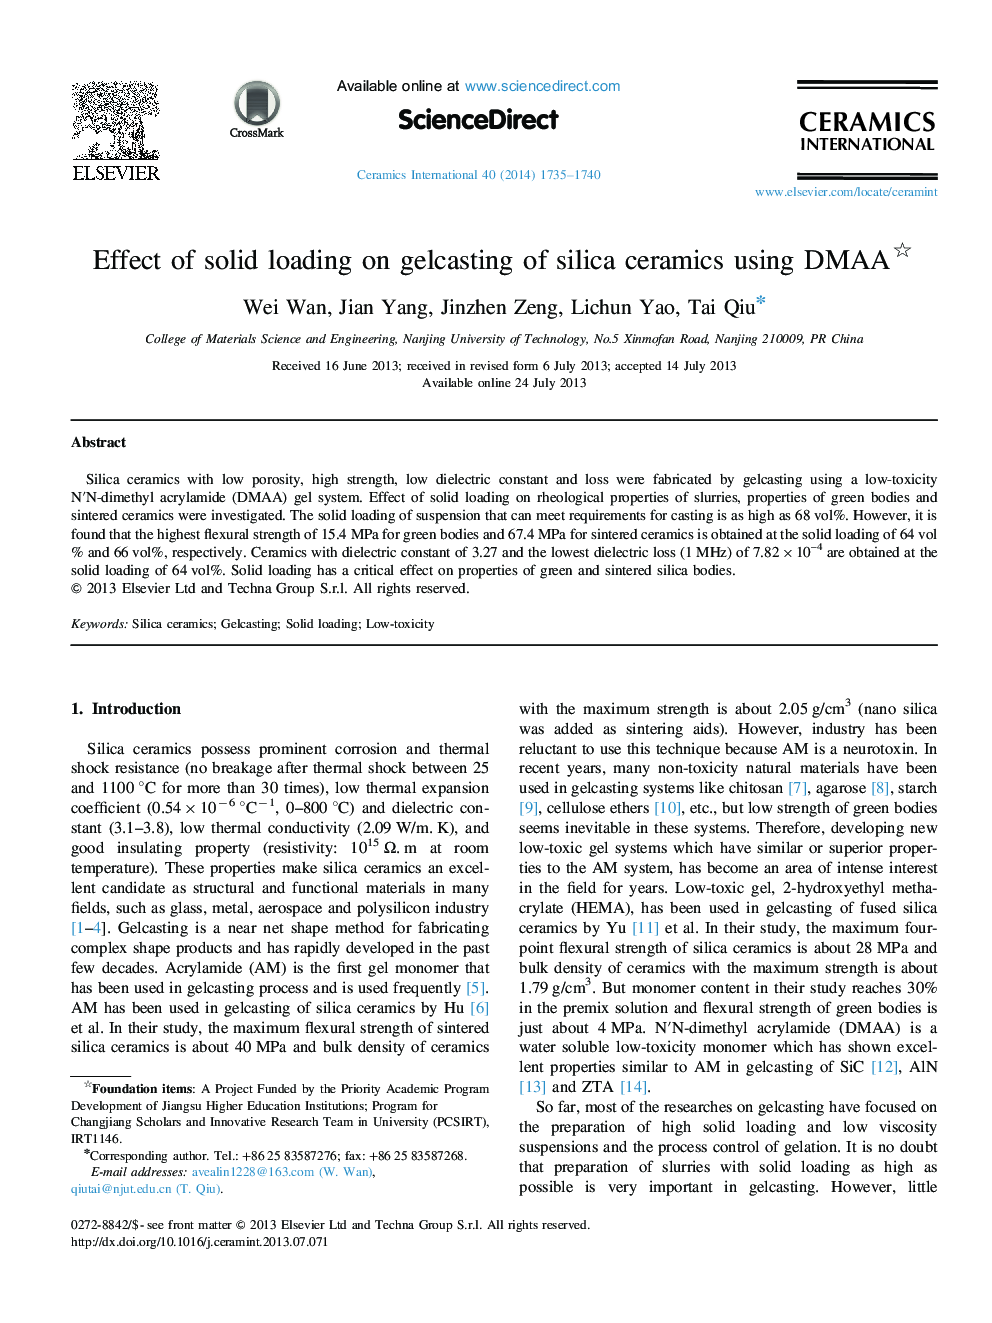 Effect of solid loading on gelcasting of silica ceramics using DMAA 